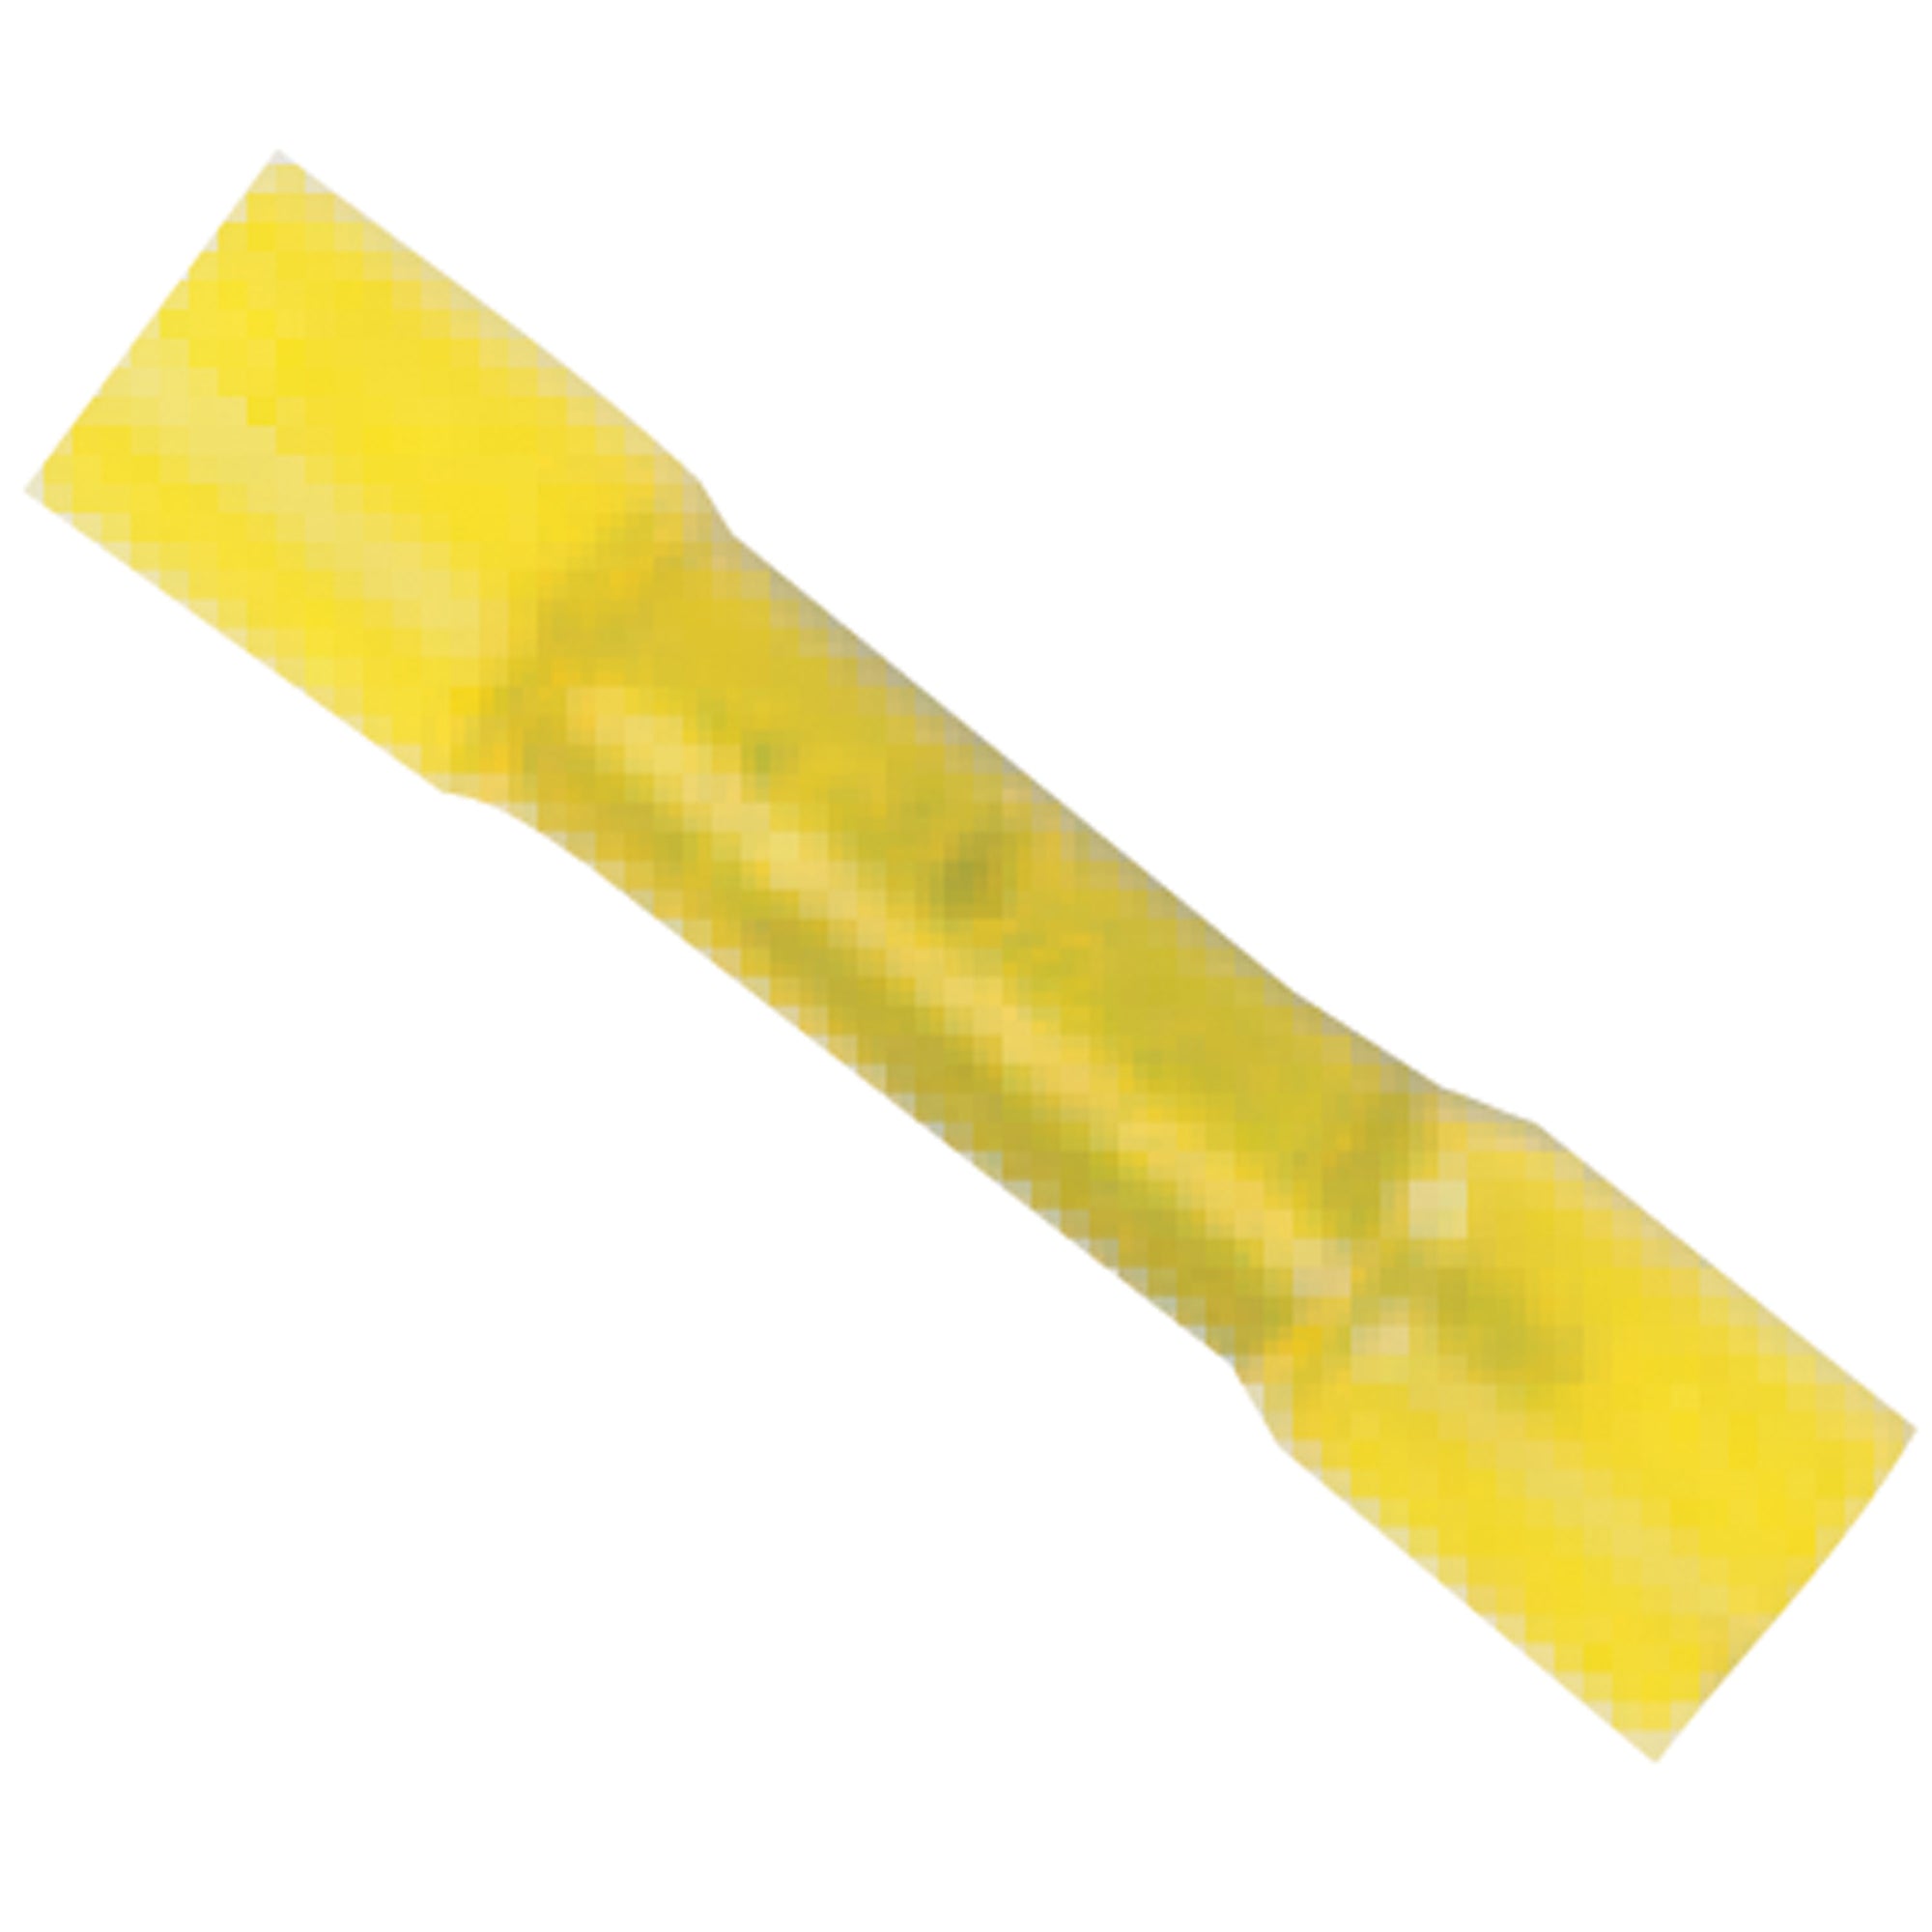 Ancor 309299 Heat Shrink Butt Connector - 12-10 (Yellow), Pack of 100